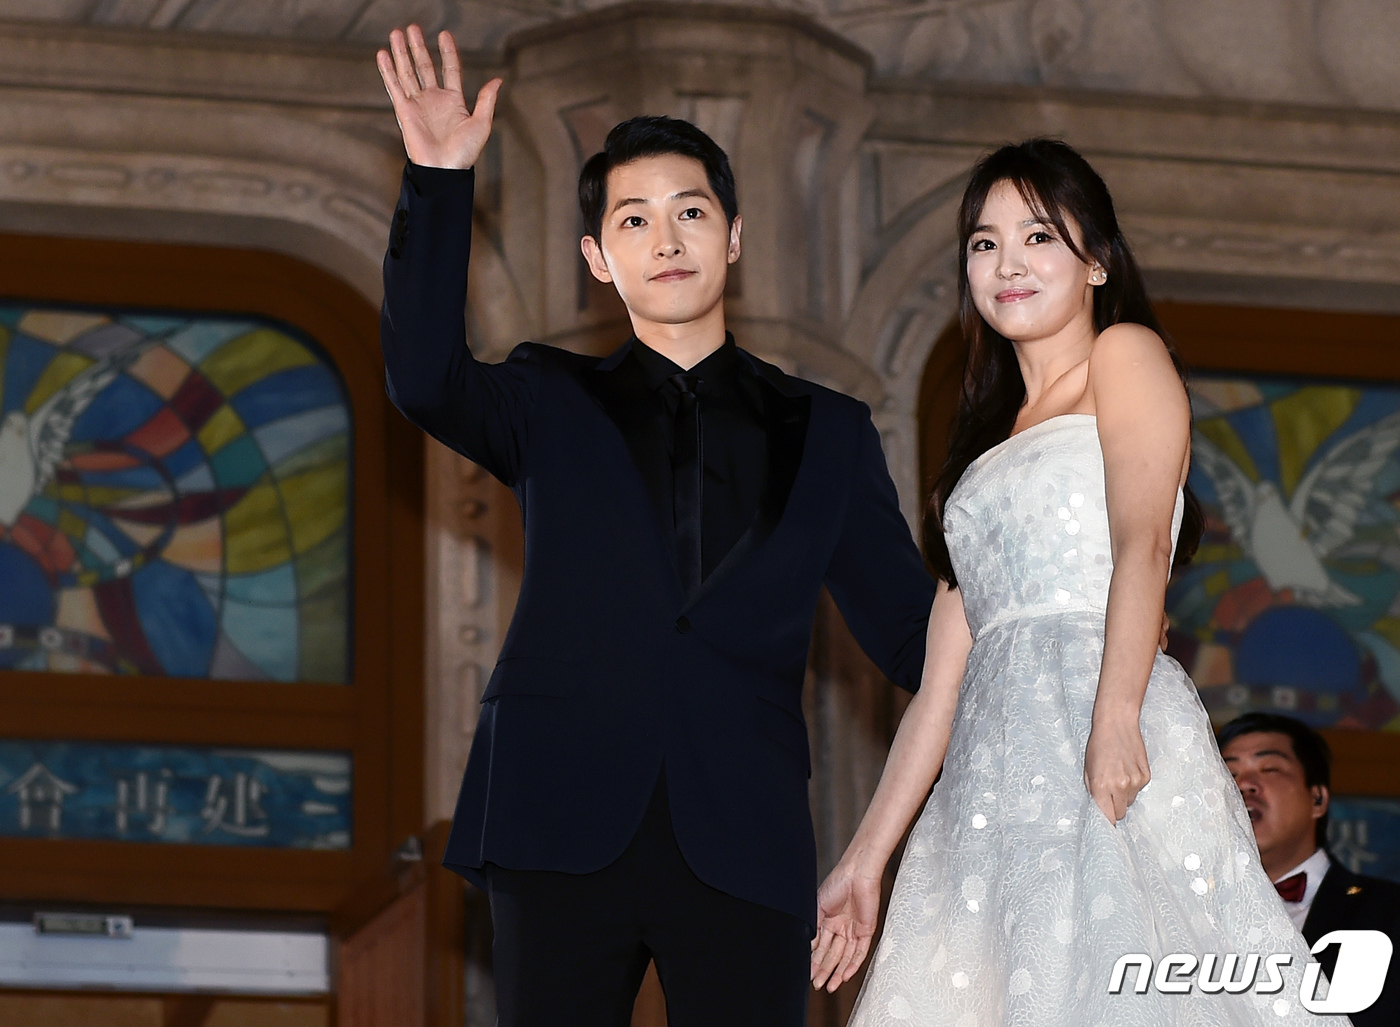 According to the legal circle on the 27th, the Seoul Family Court allocated the divorce mediation case filed by Song Joong-ki to the Household 12 (chief judge Jang Jin-young).Song Joong-ki submitted an application for divorce mediation the day before (26th), and it is reported that there are no documents issued by both sides.The divorce must be confirmed by the court directly by the court and must be in the court at least twice. However, in the case of an application for mediation, the divorce procedure can be taken through the agent without attendance.If the two agree to divorce smoothly, divorce may happen sooner than expected. If the mediation fails, it will be passed to the trial divorce process.Some say that the property of the two people, estimated at 100 billion won, will be a problem in the divorce process, but legal analysts say that there will be no big problem because the marriage period is short.However, the court is expected to catch the first mediation date by the end of next month, if there is no child in the mediation case,Song Joong-ki and Song Hye-kyo, who appeared in the KBS 2TV drama Dawn of the Sun, which ended in April 2016, married in October 2017 and made a marriage with the couple.The Household 12 Deliberation in the Seoul Family Court